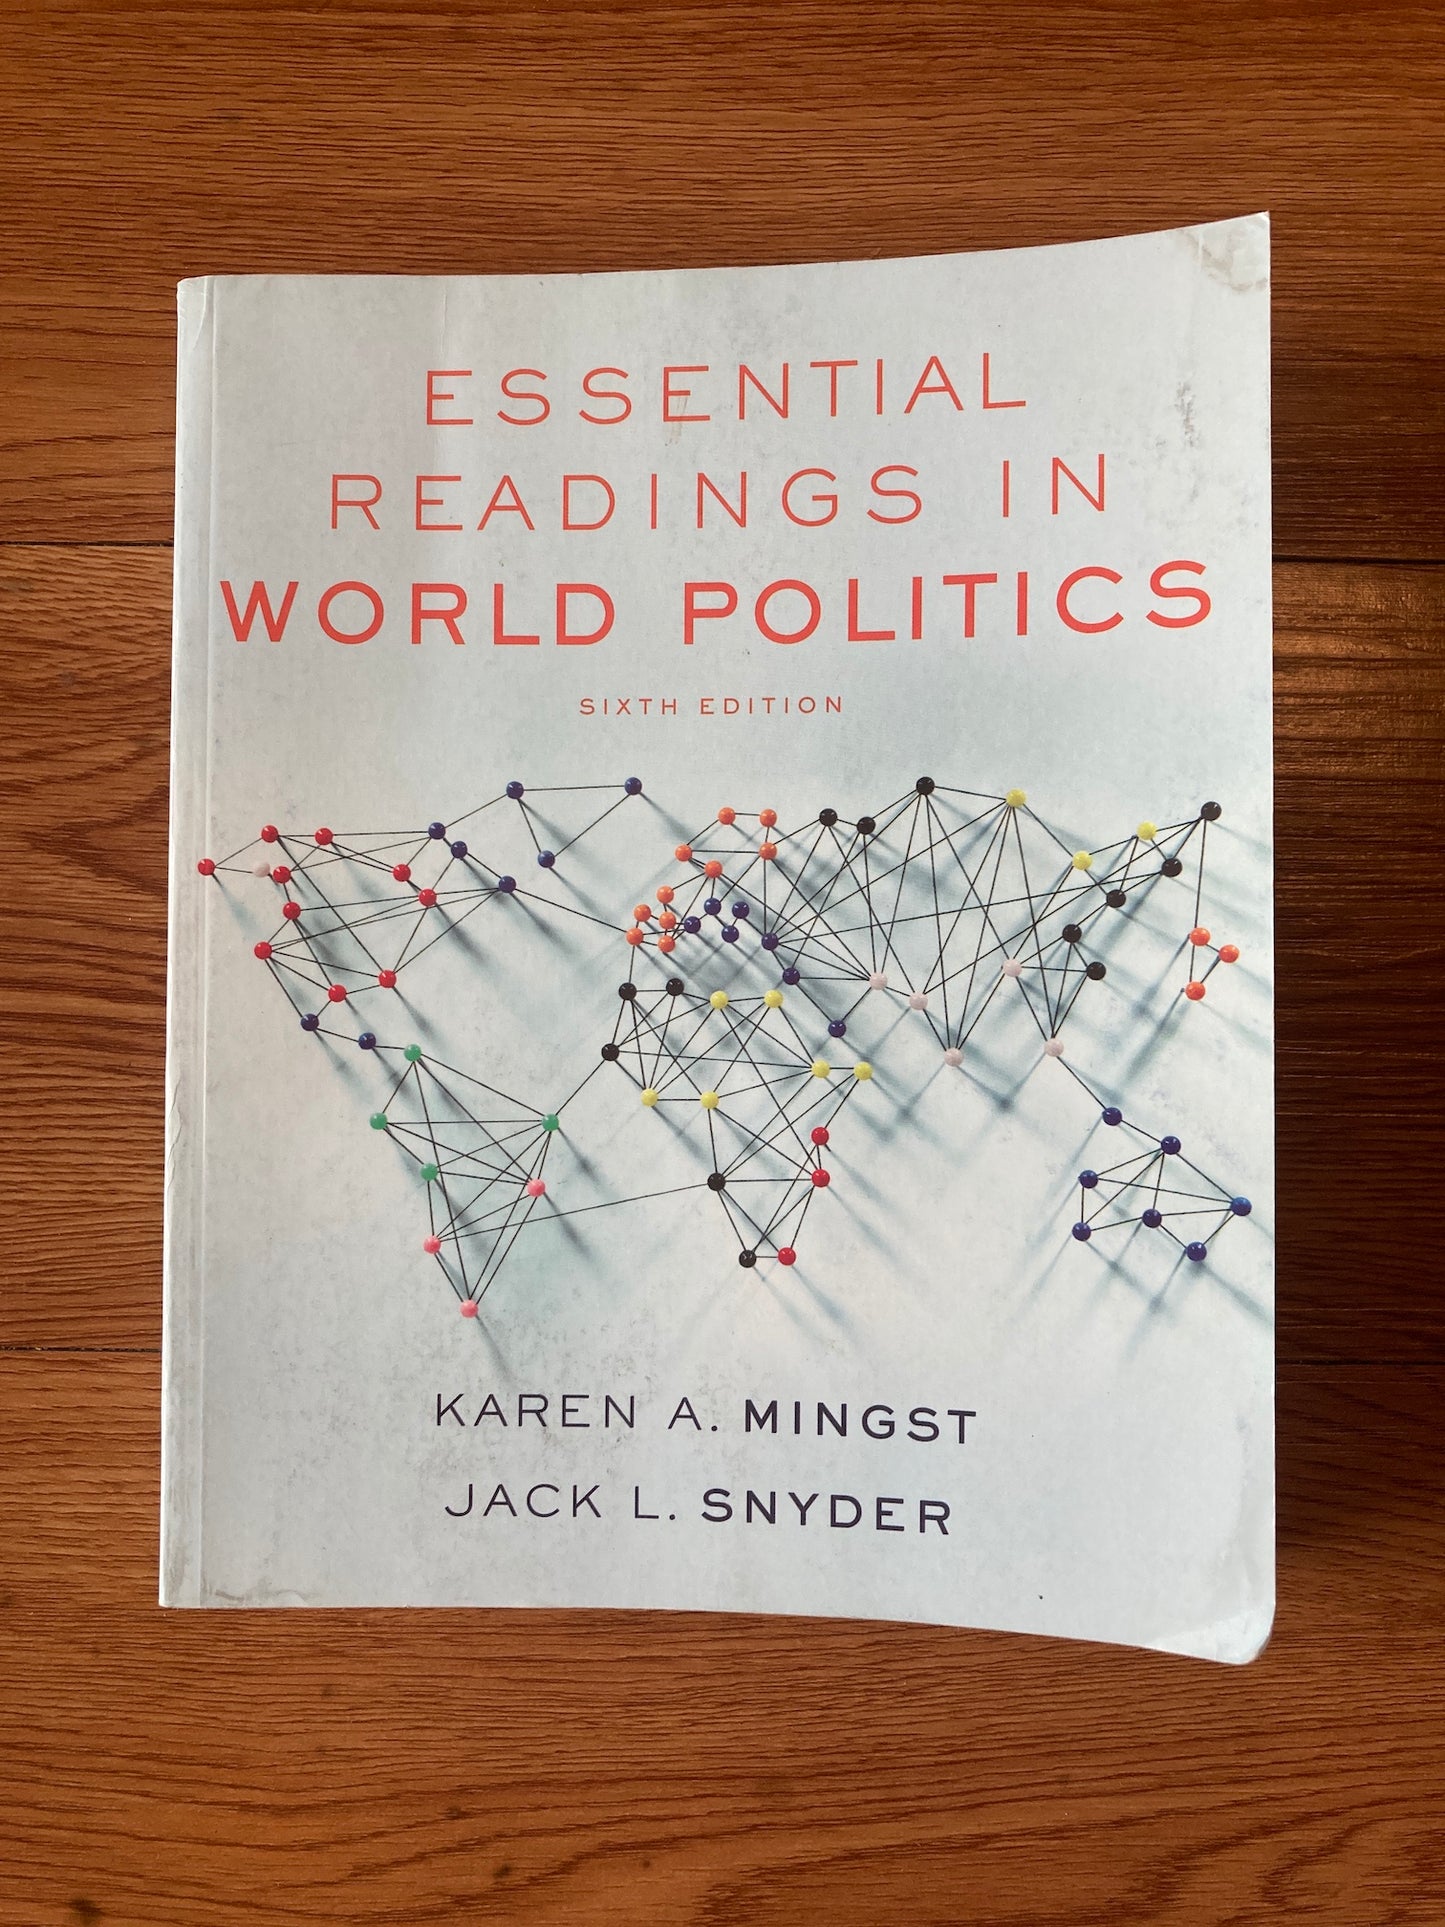 Essential Readings in World Politics (Sixth Edition)